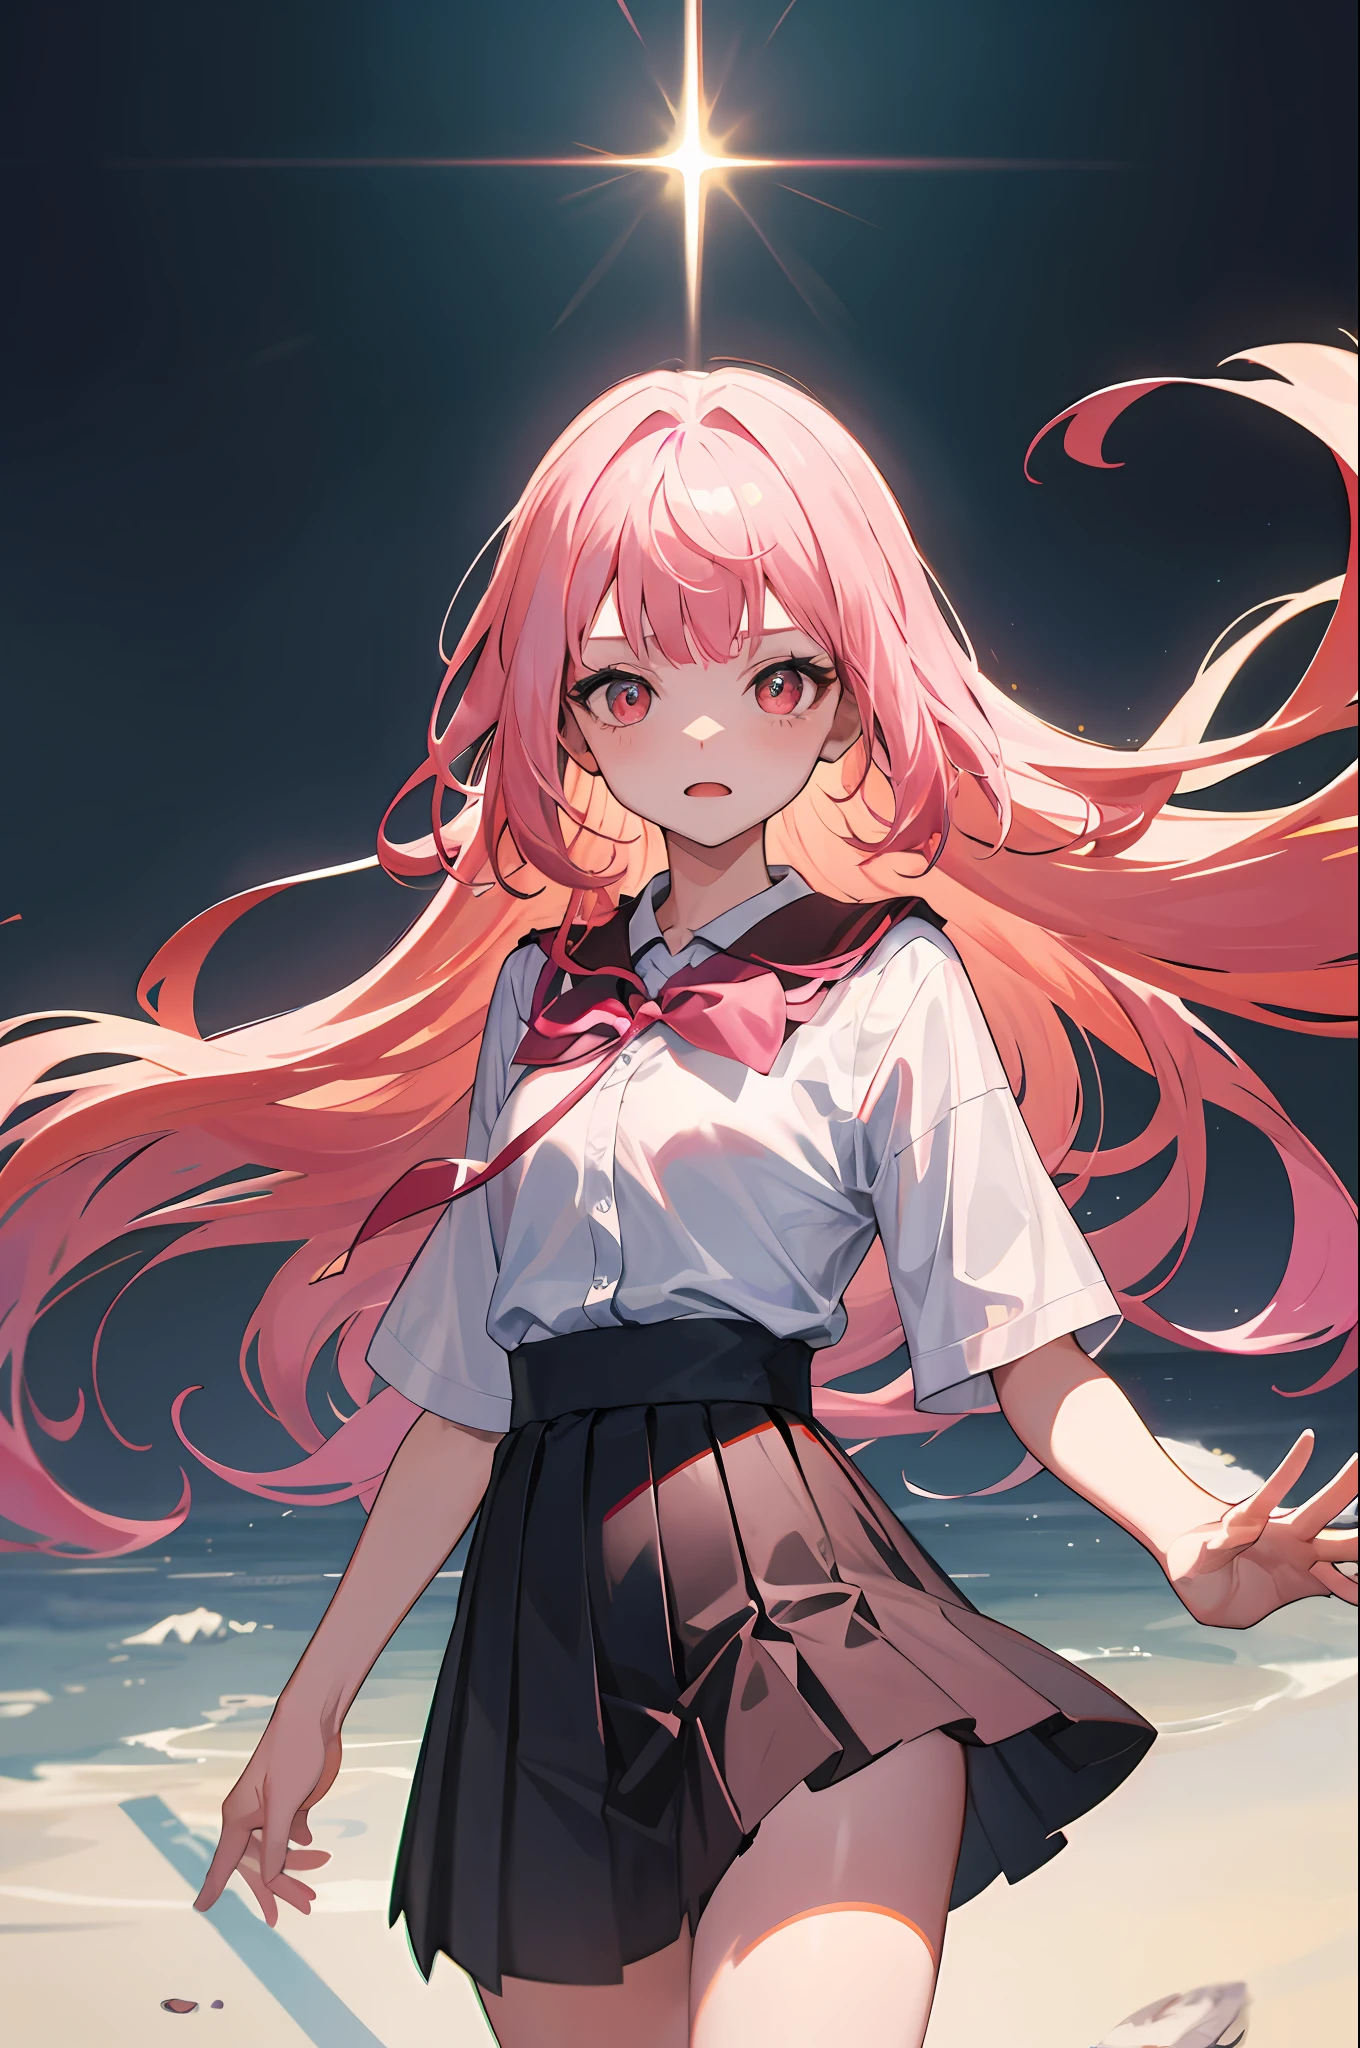 （absurderes， A high resolution， ultra - detailed）， 1 girl， solo， （Very long hair， Pink hair）， Colorful， The finest details， 16 years old， small， Superskirt， Uniforms， short- sleeved， deep dark background， Santorini, Greeks